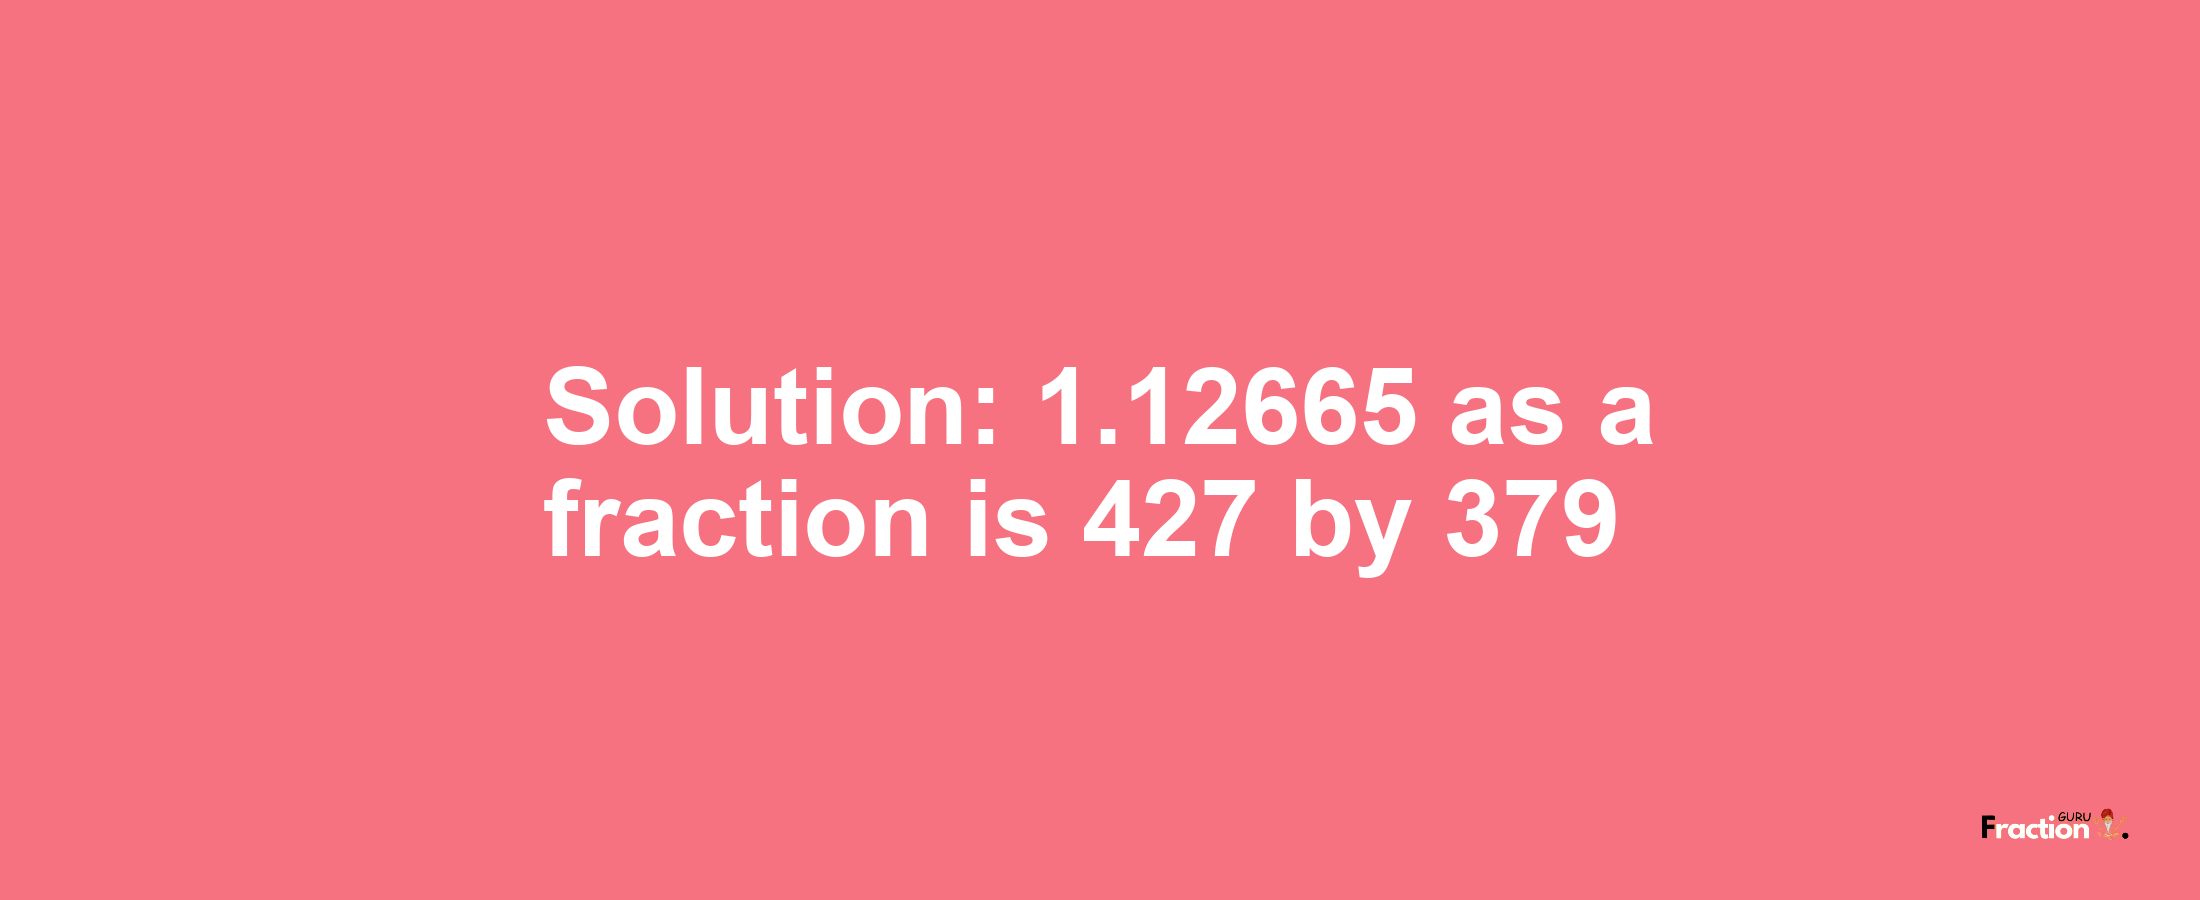 Solution:1.12665 as a fraction is 427/379